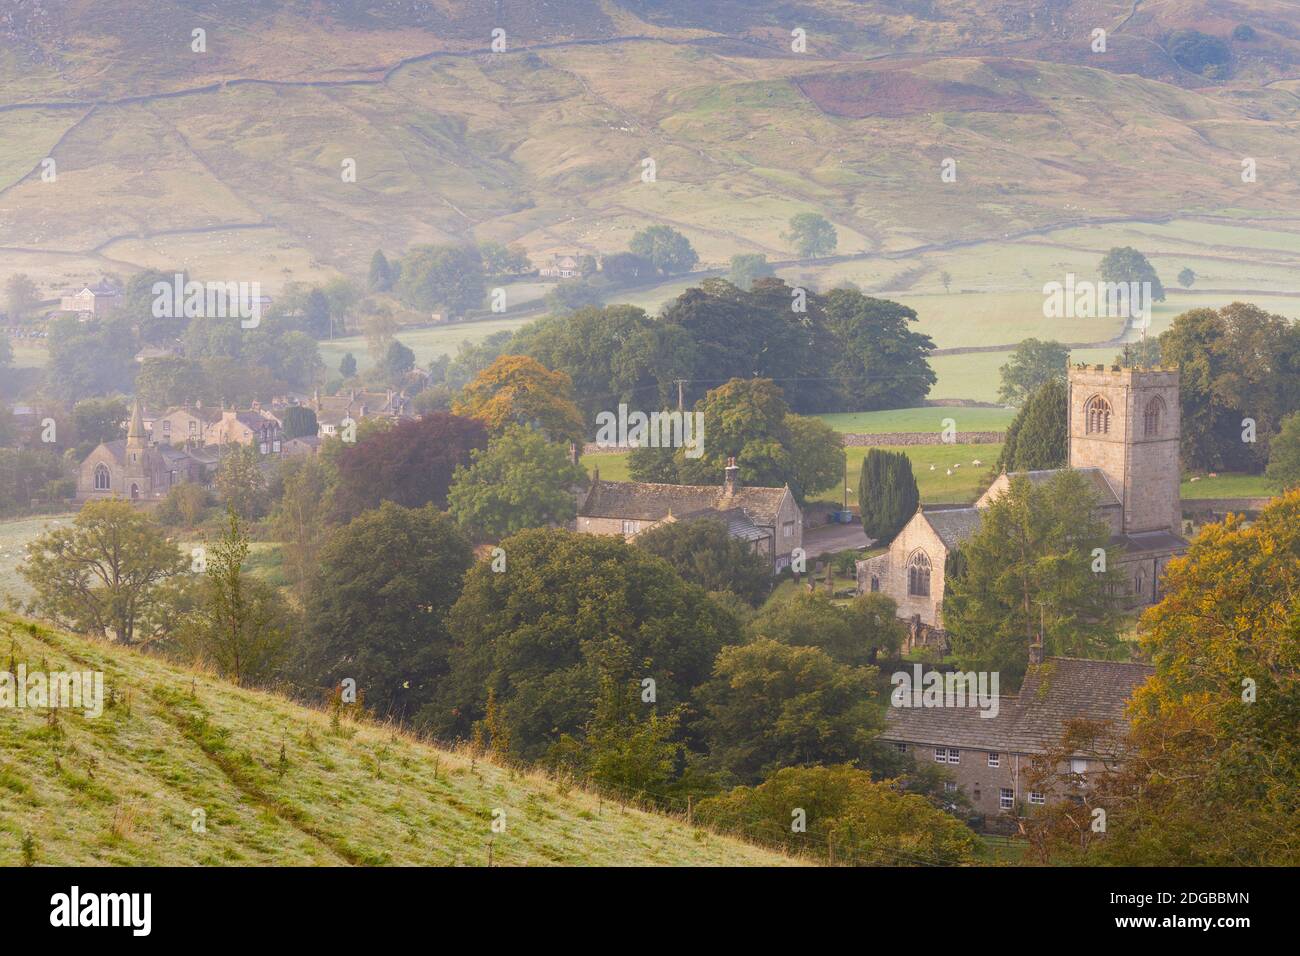 High angle view of a village, Burnsall, Yorkshire Dales National Park, North Yorkshire, England Stock Photo